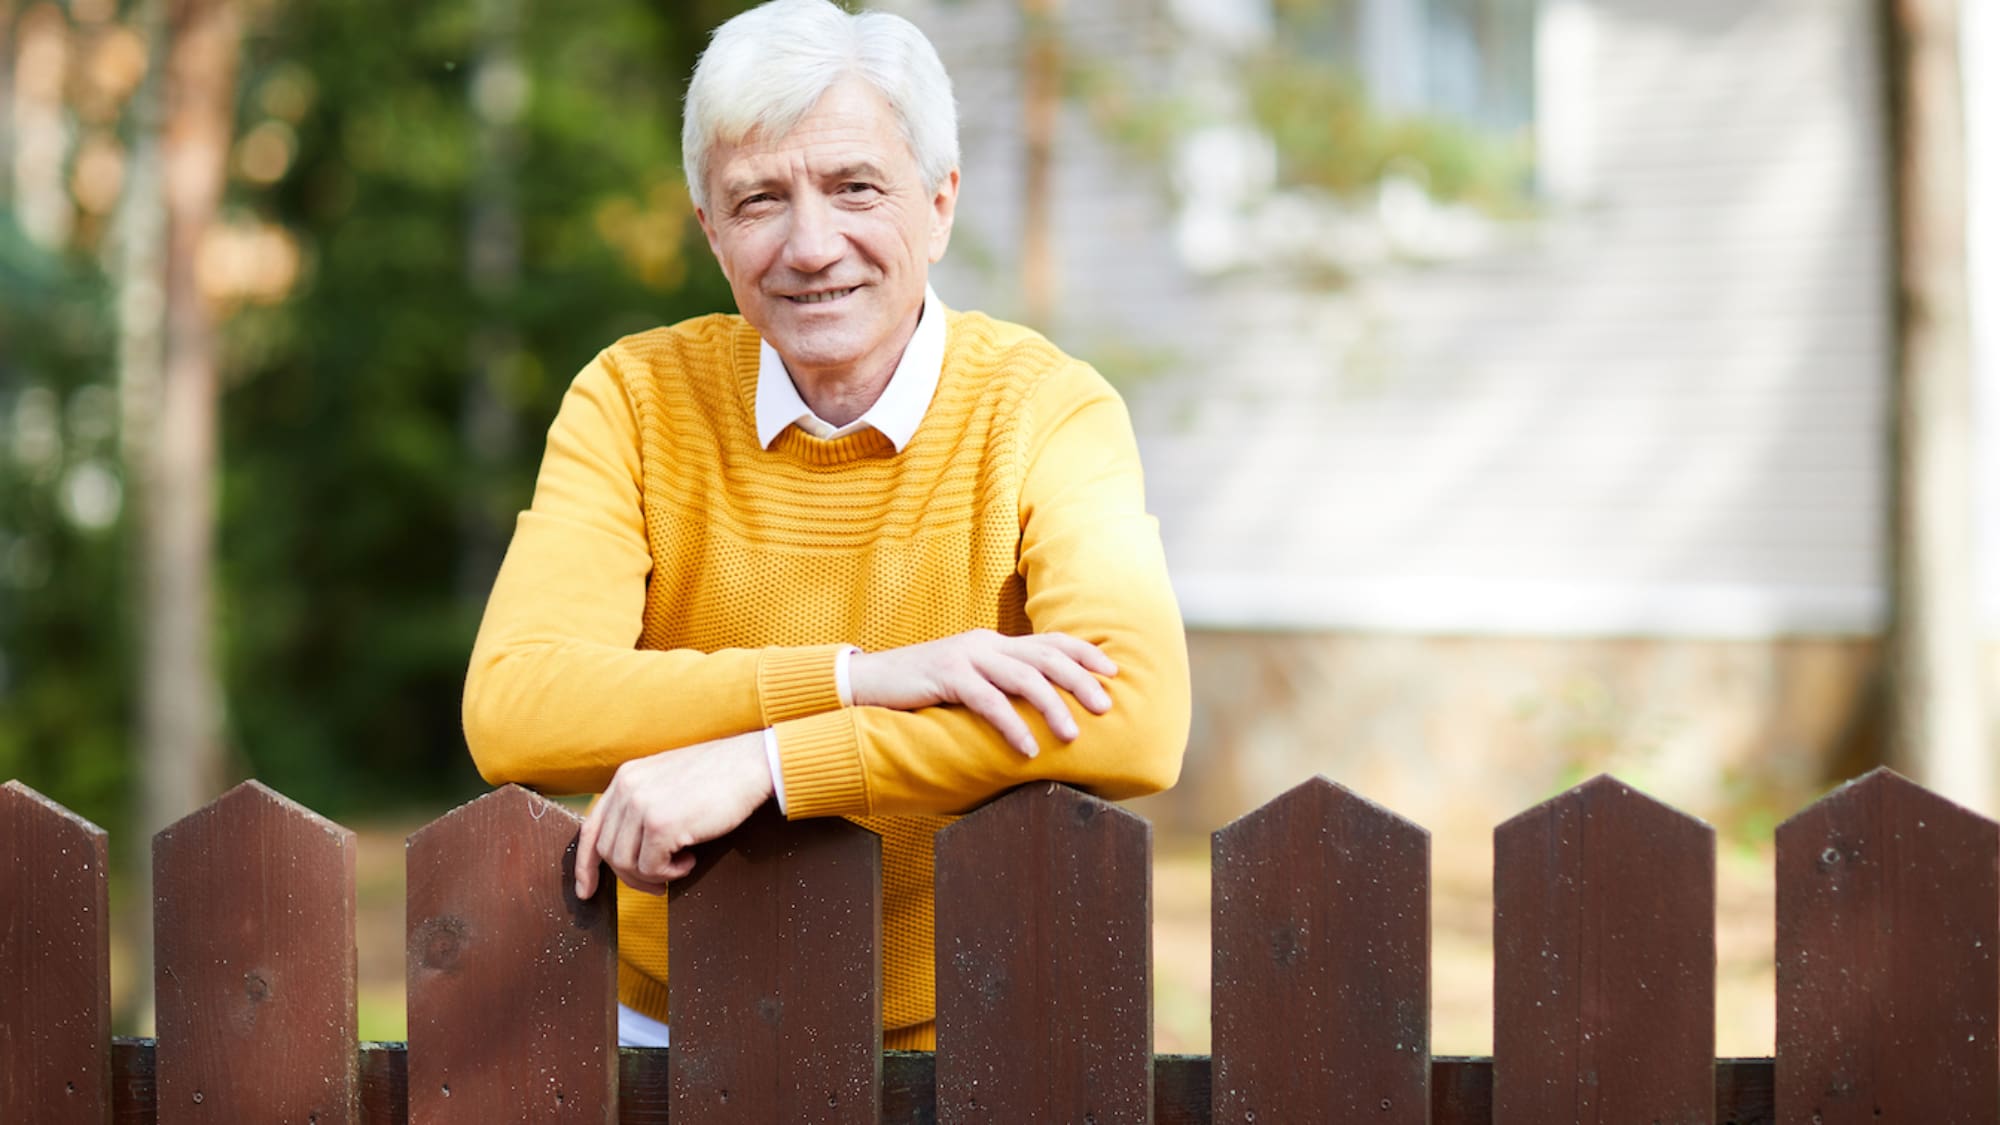 Senior man with grey hair leaning against wooden fence while looking at camera